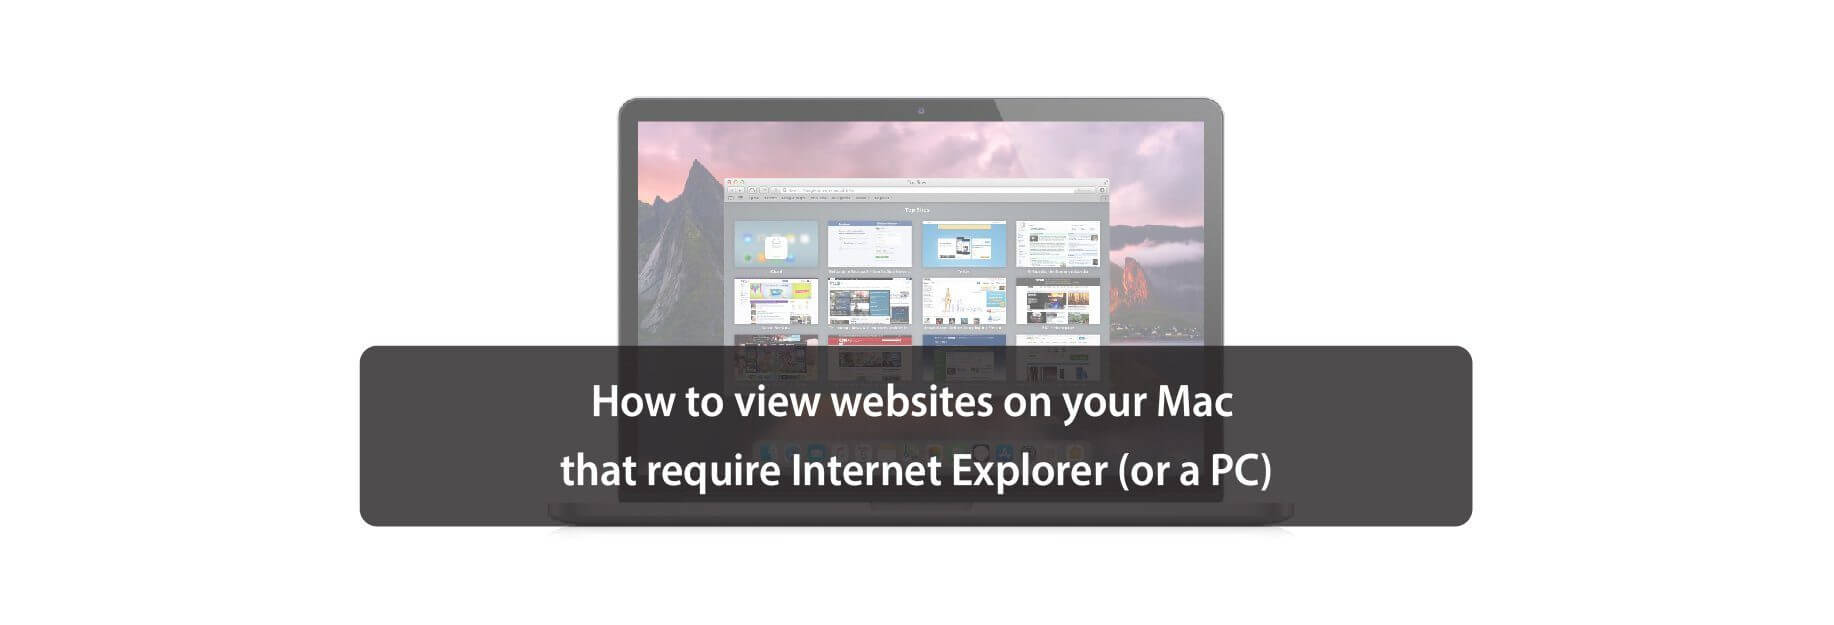 How to view websites on your Mac that require Internet Explorer (or a PC)